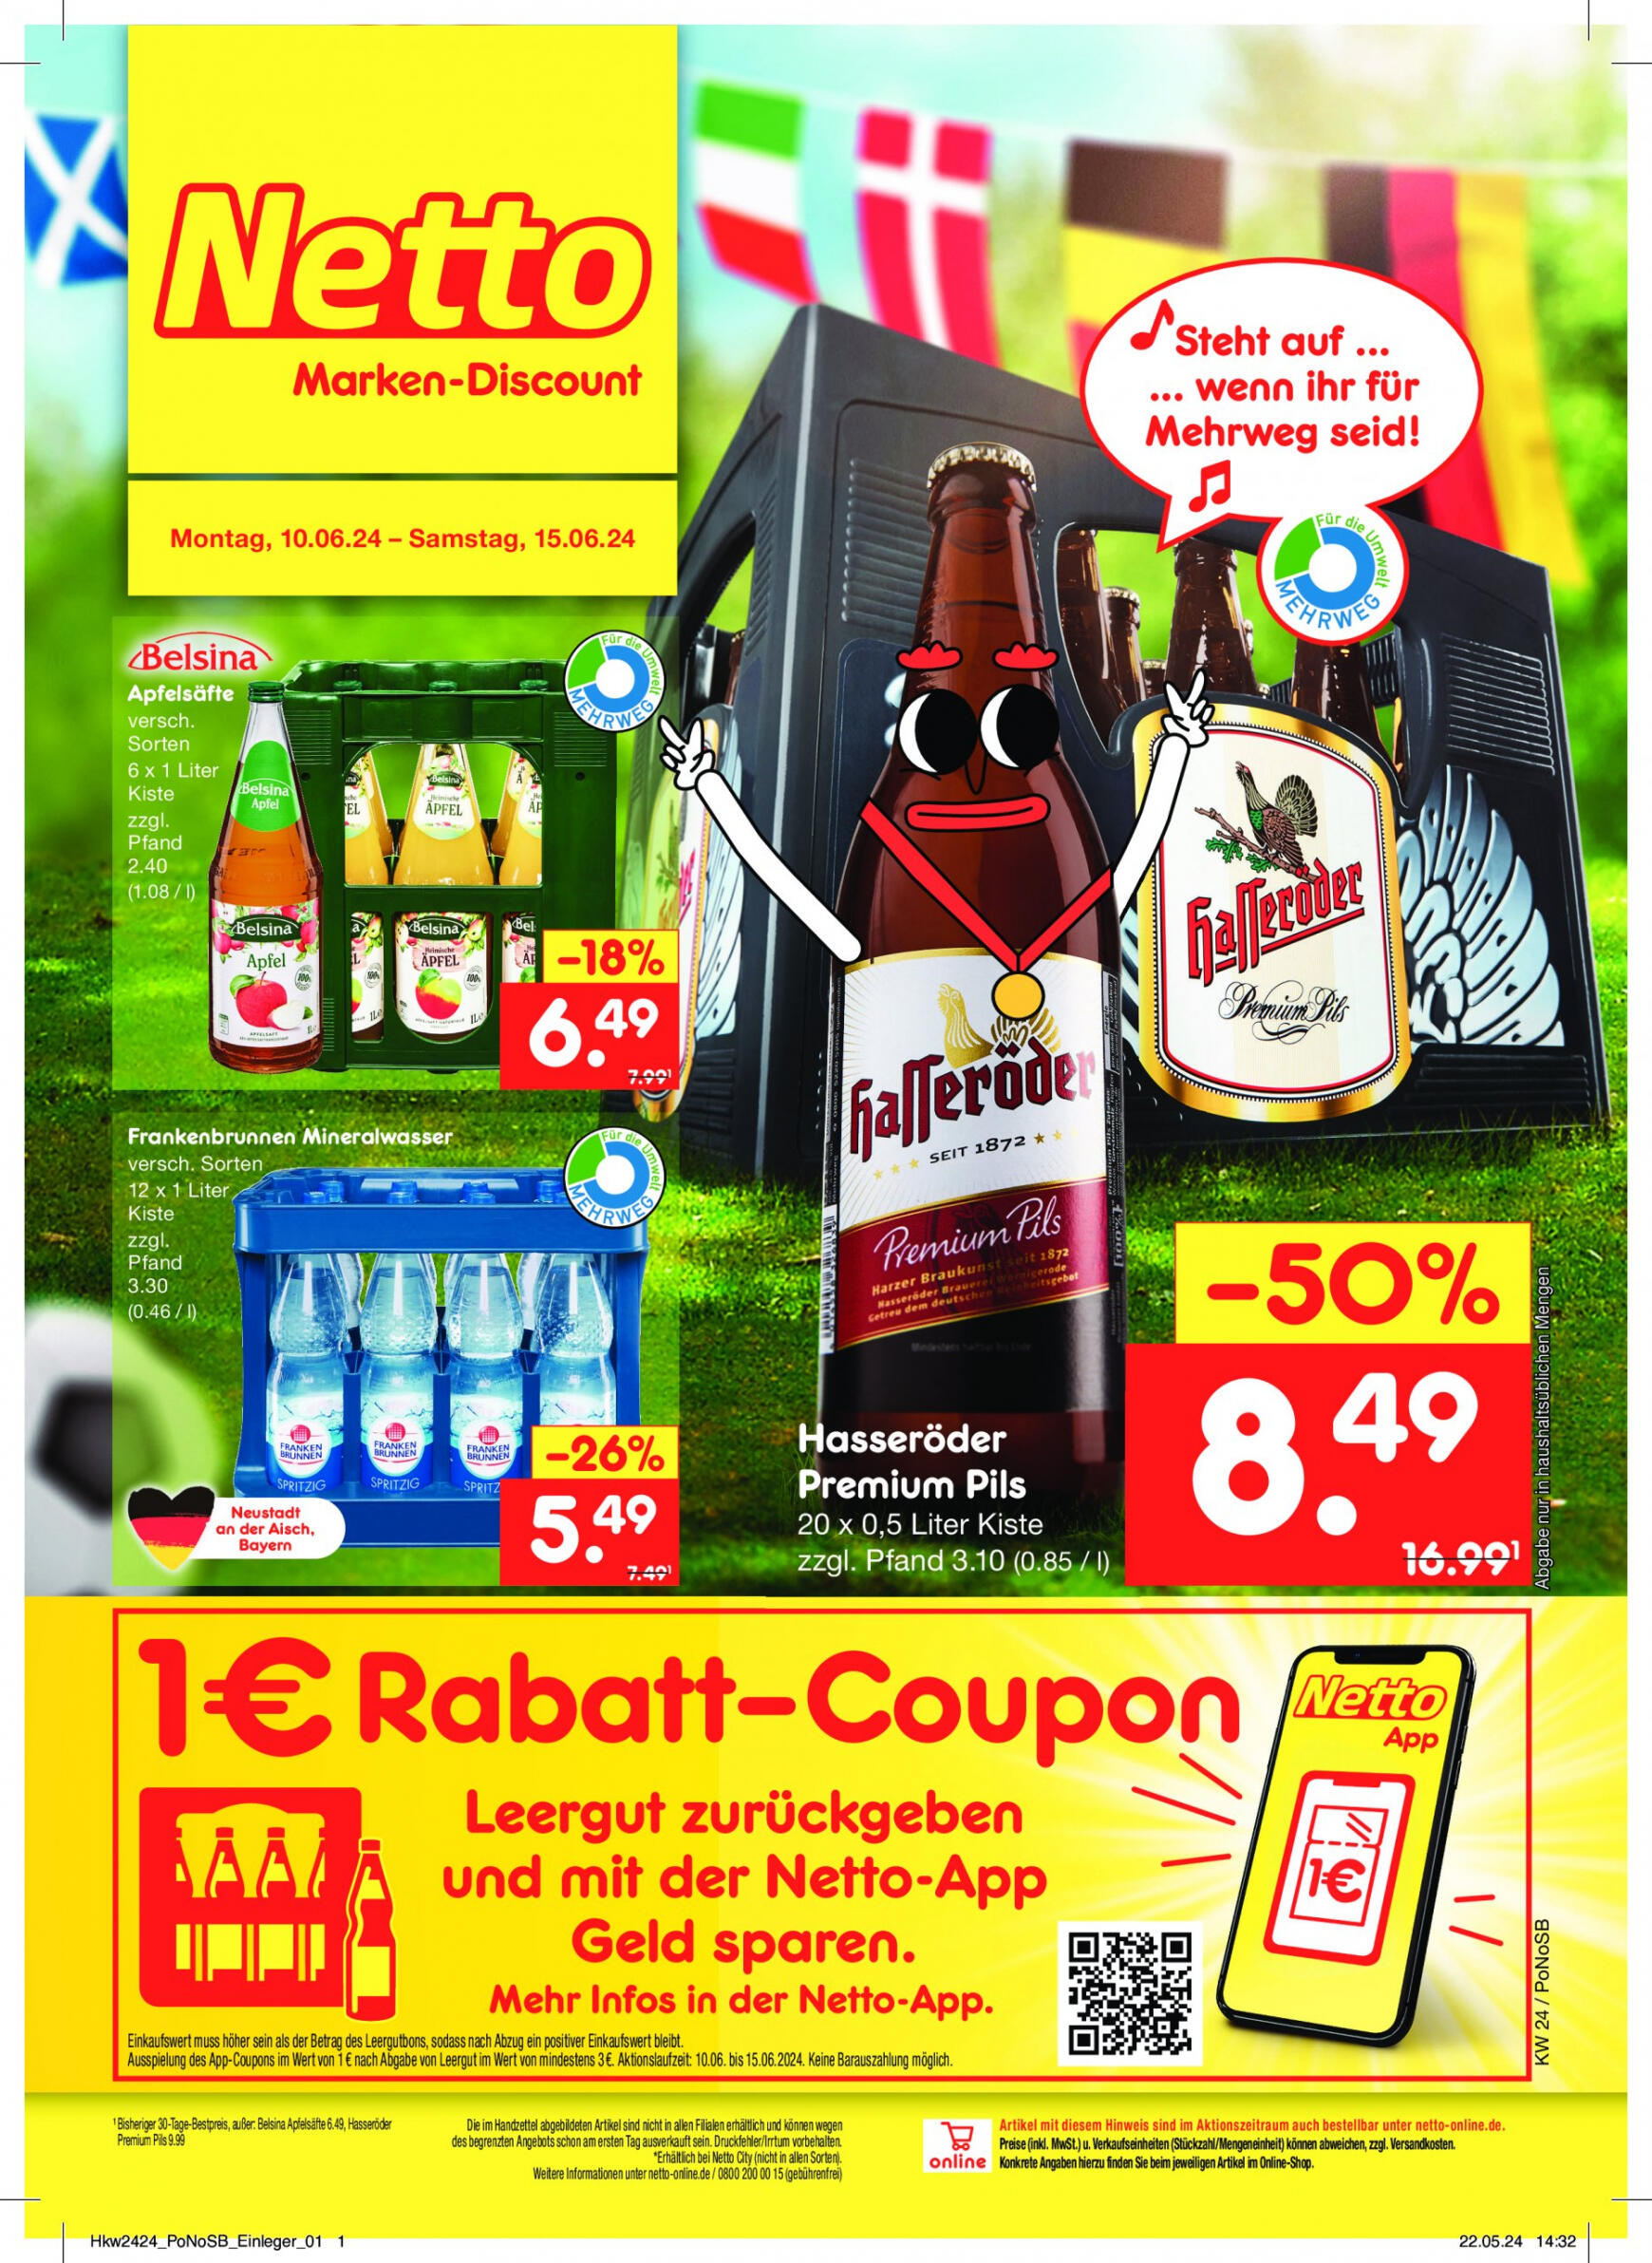 netto - Flyer Netto aktuell 10.06. - 15.06. - page: 18